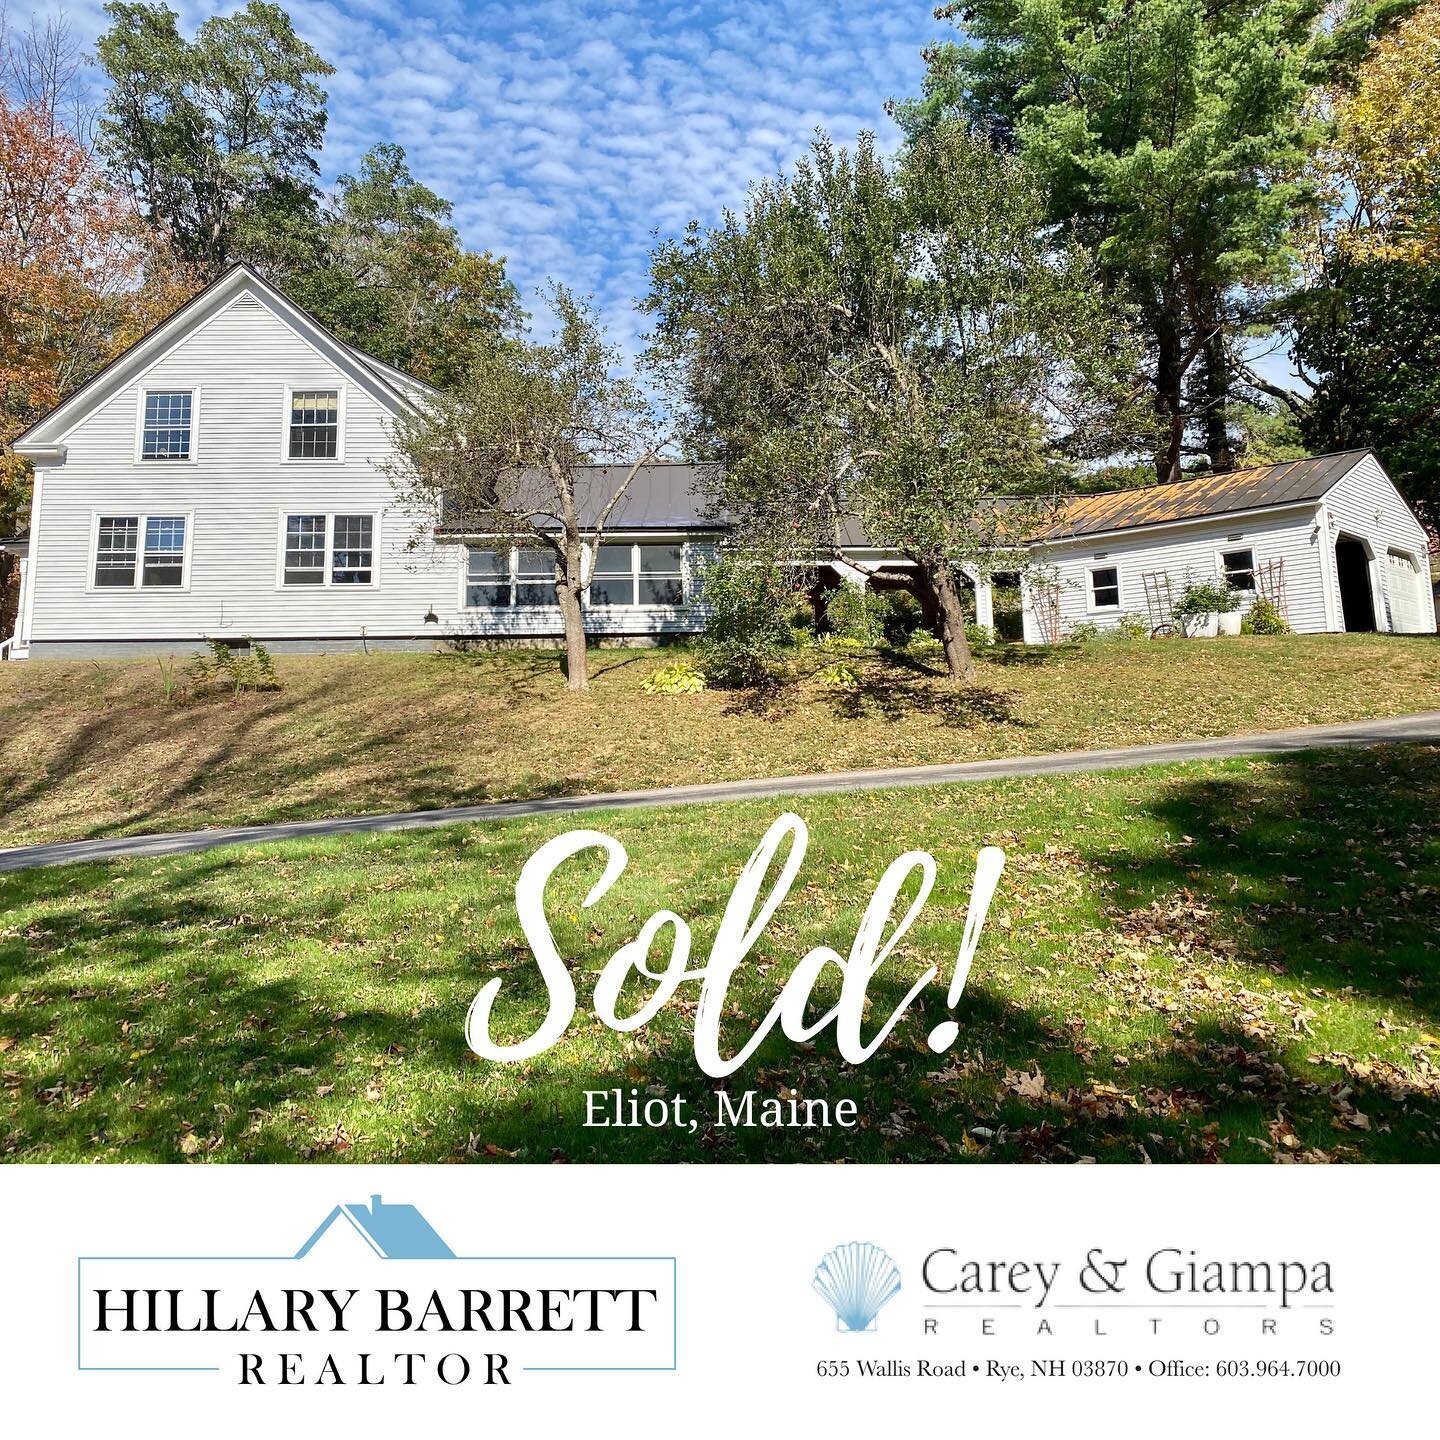 So happy for my buyers!! We found the home of their dreams here in #Eliot #Maine &amp; after a competitive multiple offer situation we came out on top! 
Please reach out if you need help navigating this wild market! I&rsquo;m always available and I w